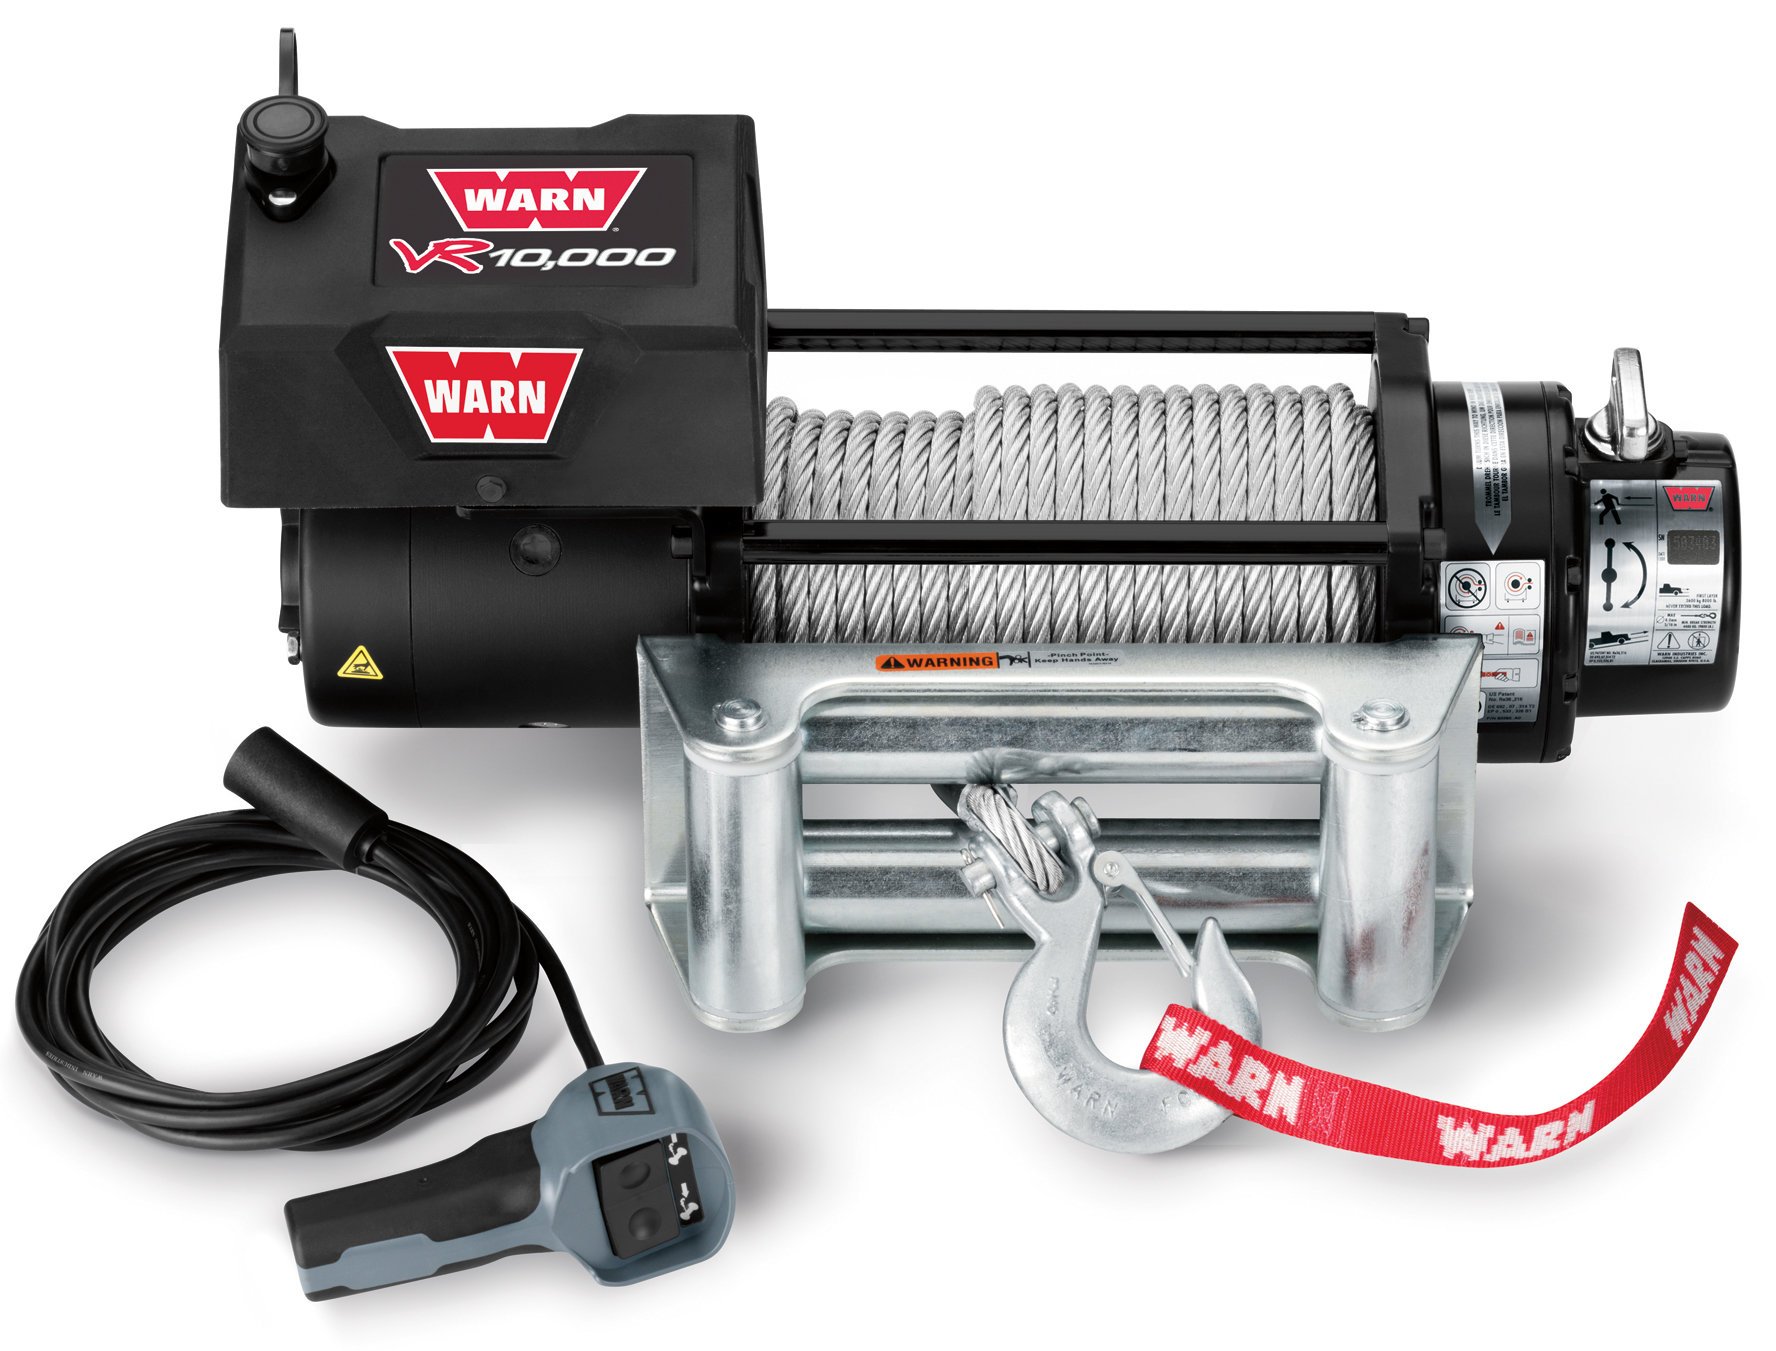 WARN 86255 VR10000 Winch with 94' Wire Rope and Roller ... racing electronics wiring diagram 